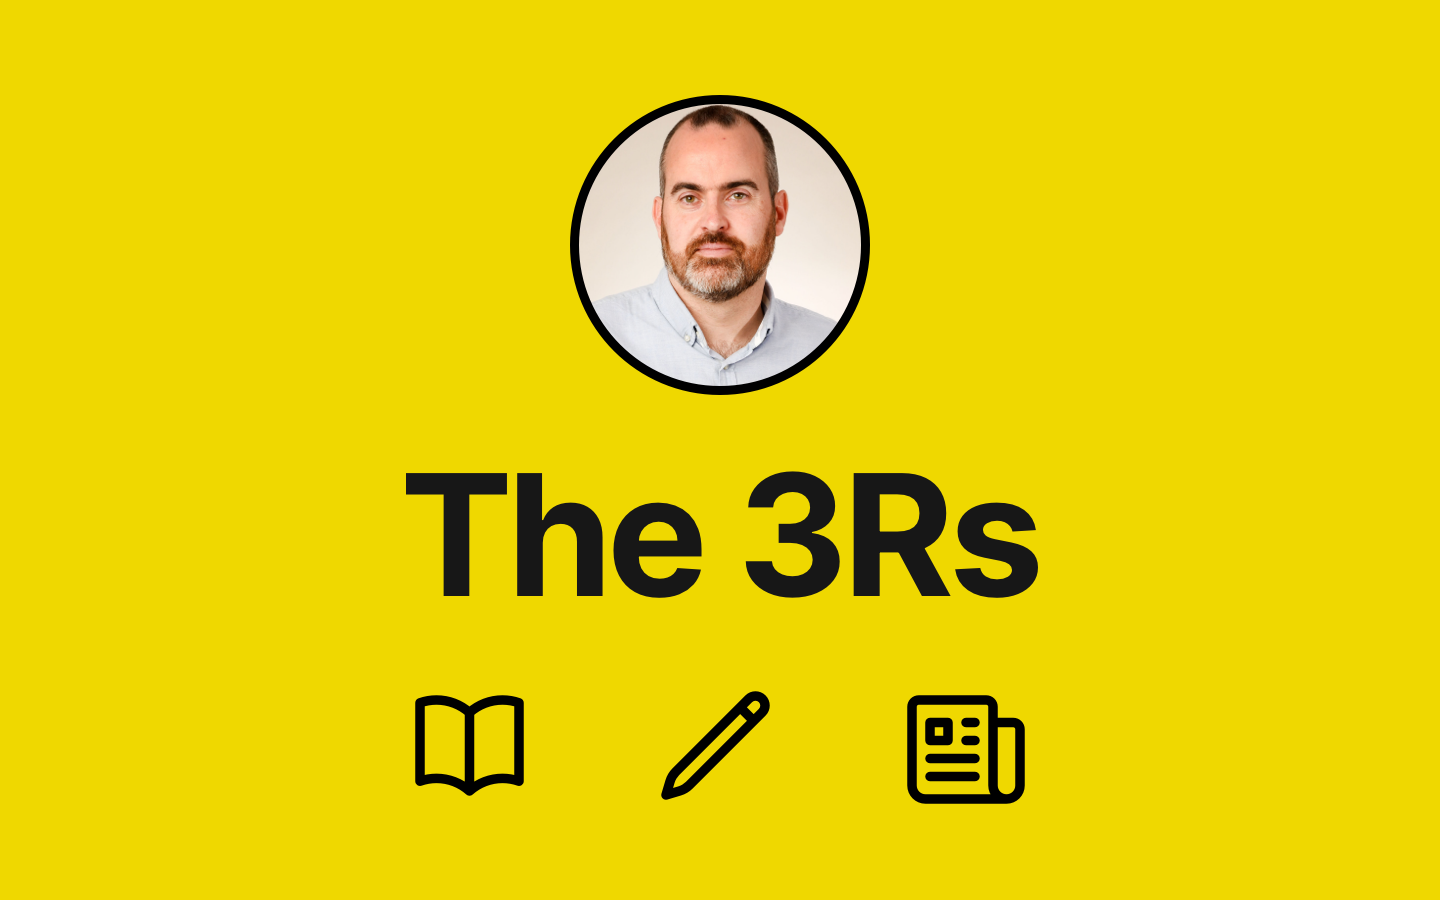 The 3Rs - Reading, w®iting, and research to be interested in #21 feature image